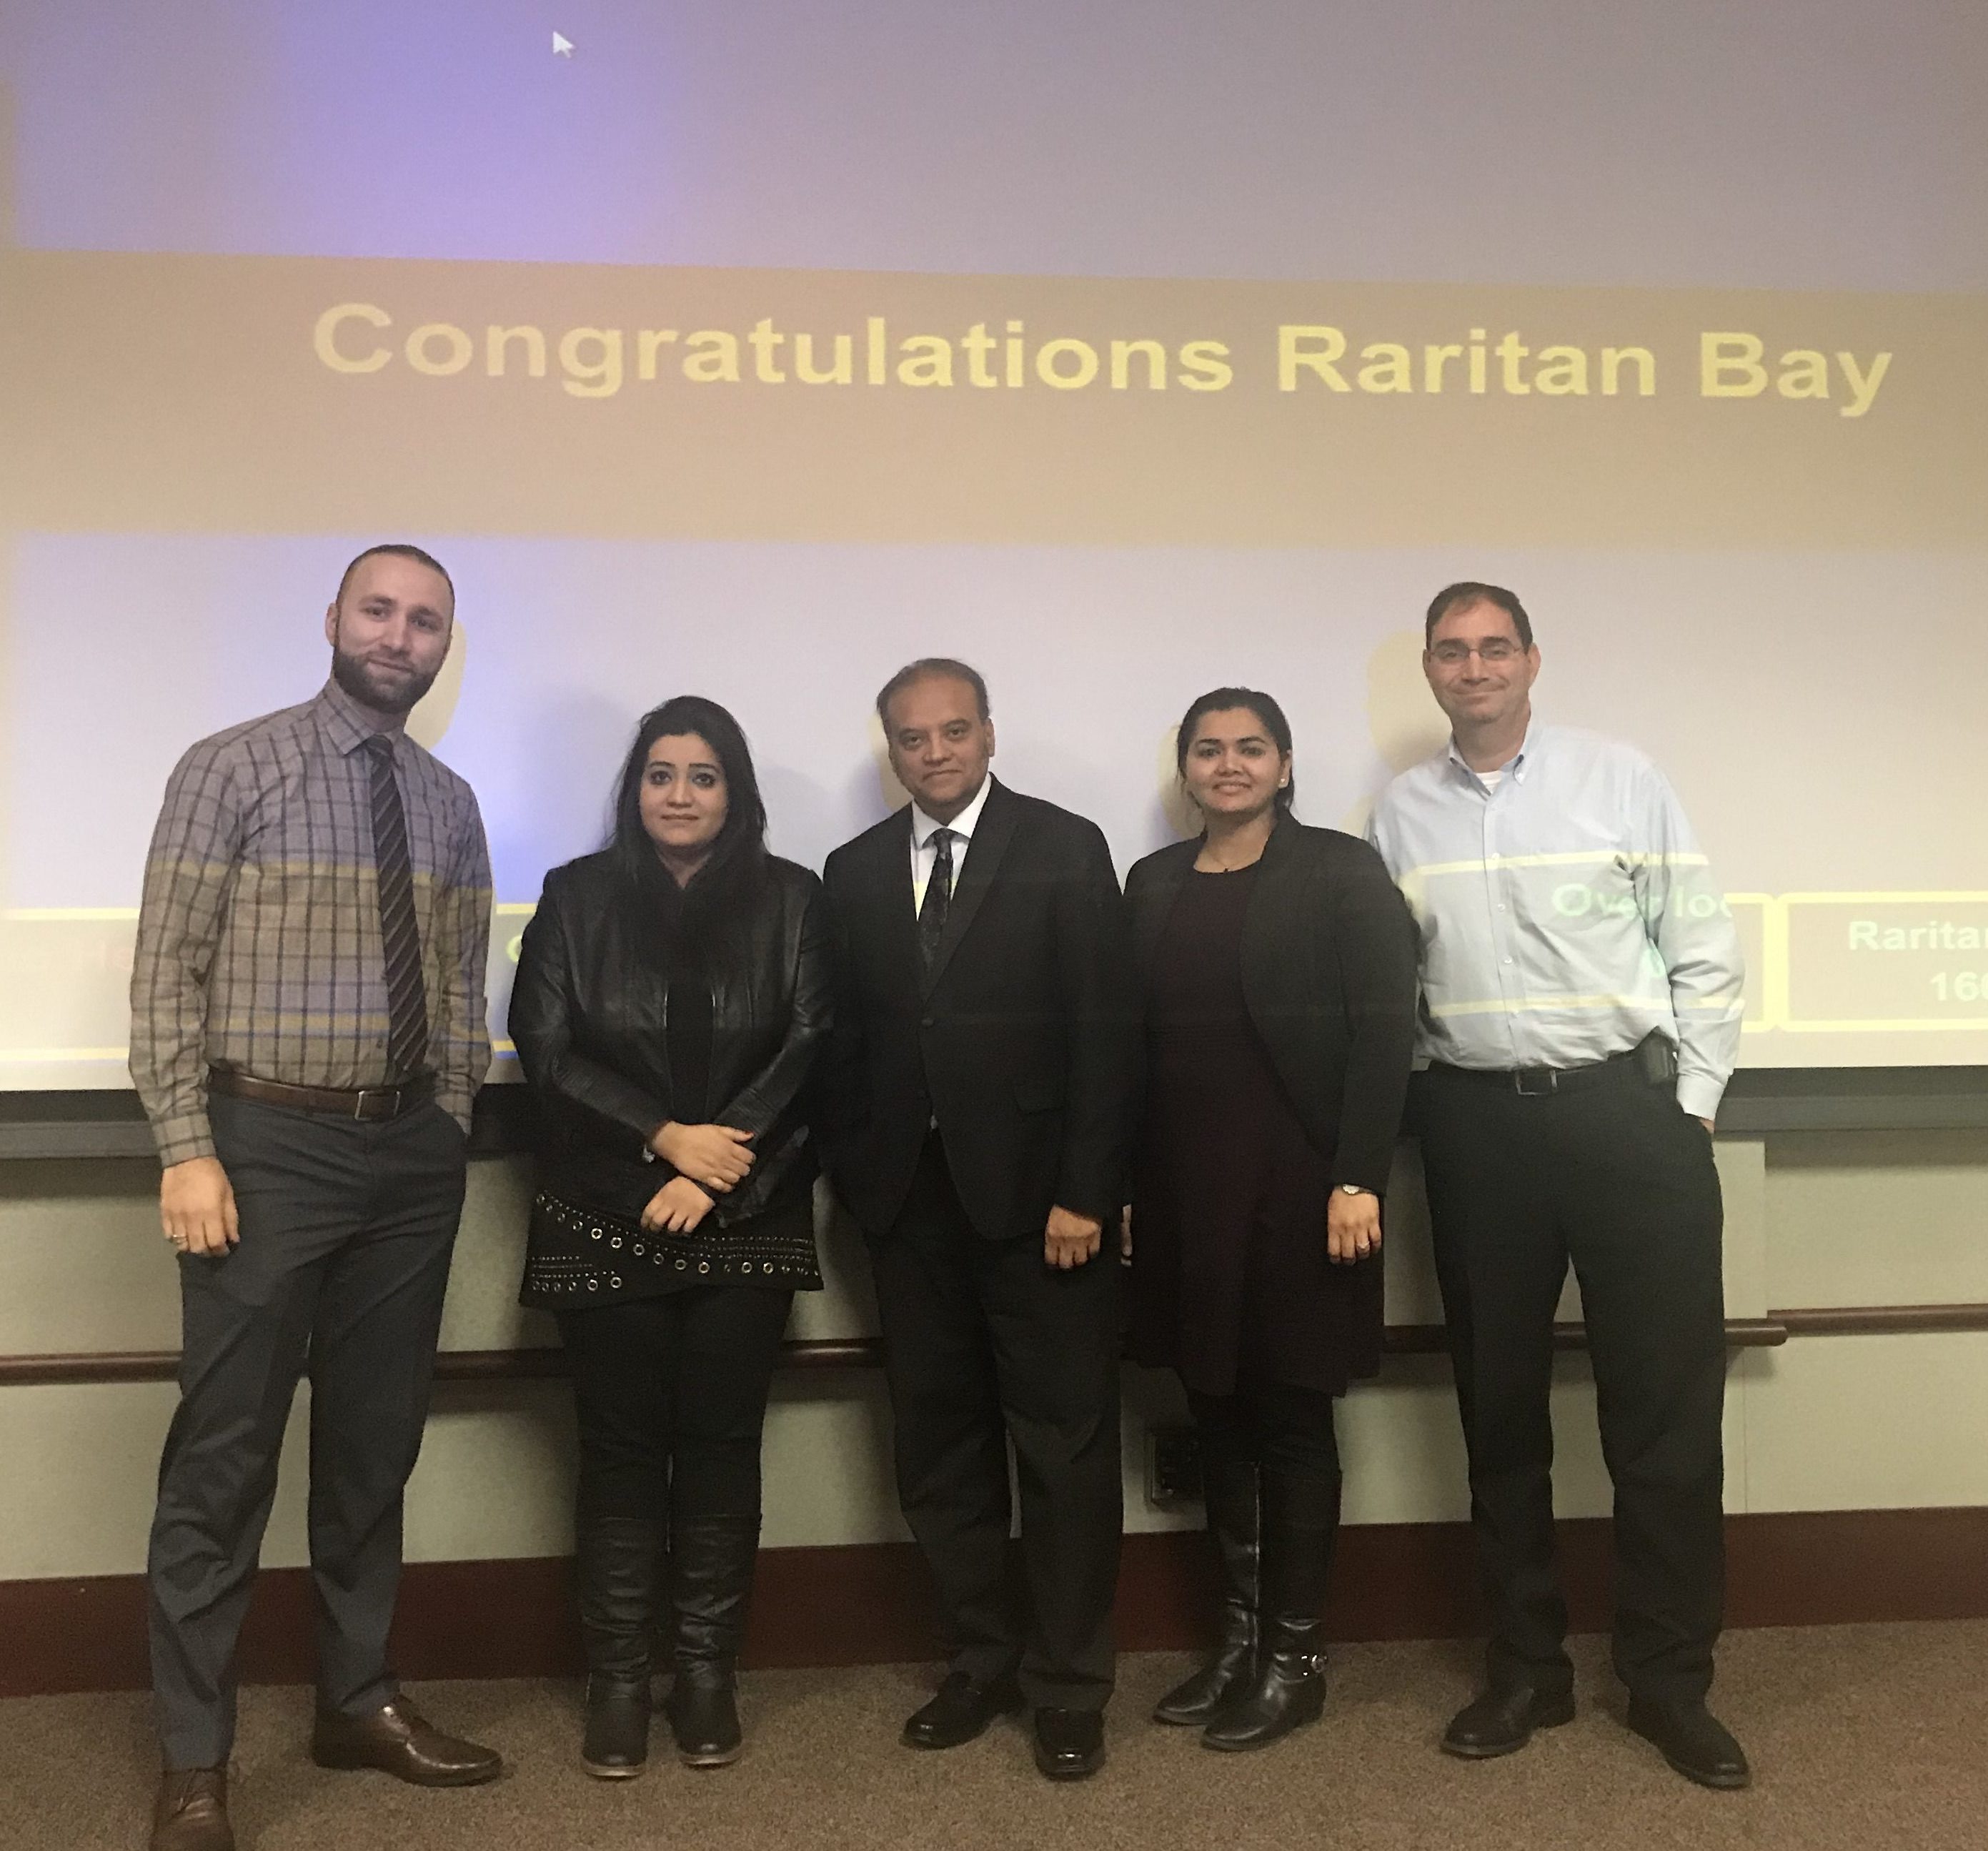 Congratulations to Raritan Bay Medical Center for their first round victory in our ACP-NJ Internal Medicine Residents Challenge Bowl. 